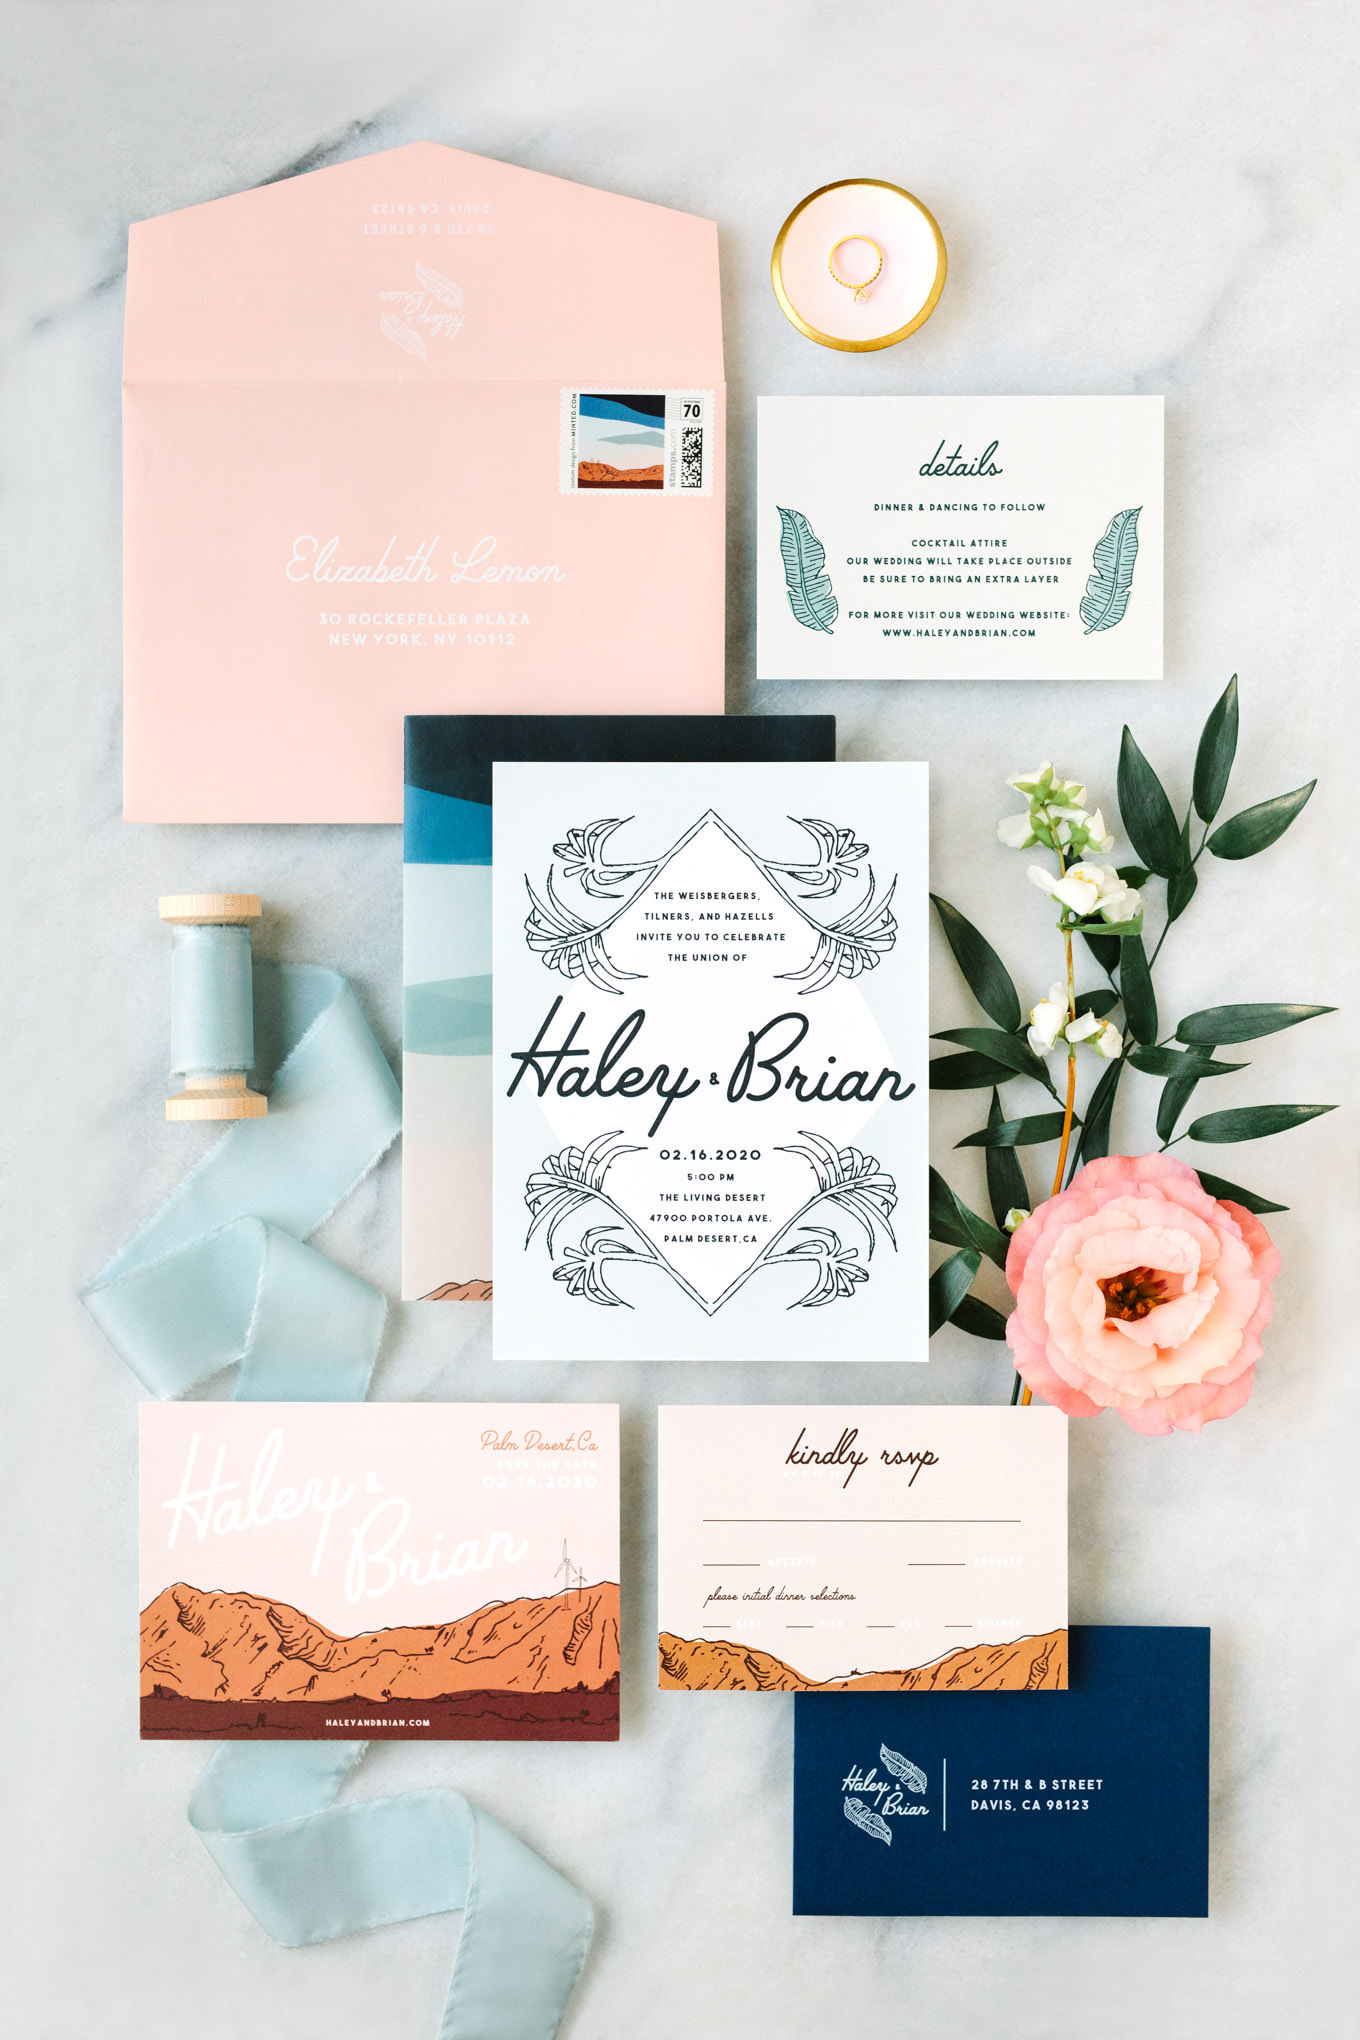 Blush and blue wedding invitation suite | Living Desert Zoo & Gardens wedding with unique details | Elevated and colorful wedding photography for fun-loving couples in Southern California |  #PalmSprings #palmspringsphotographer #gardenwedding #palmspringswedding  Source: Mary Costa Photography | Los Angeles wedding photographer 